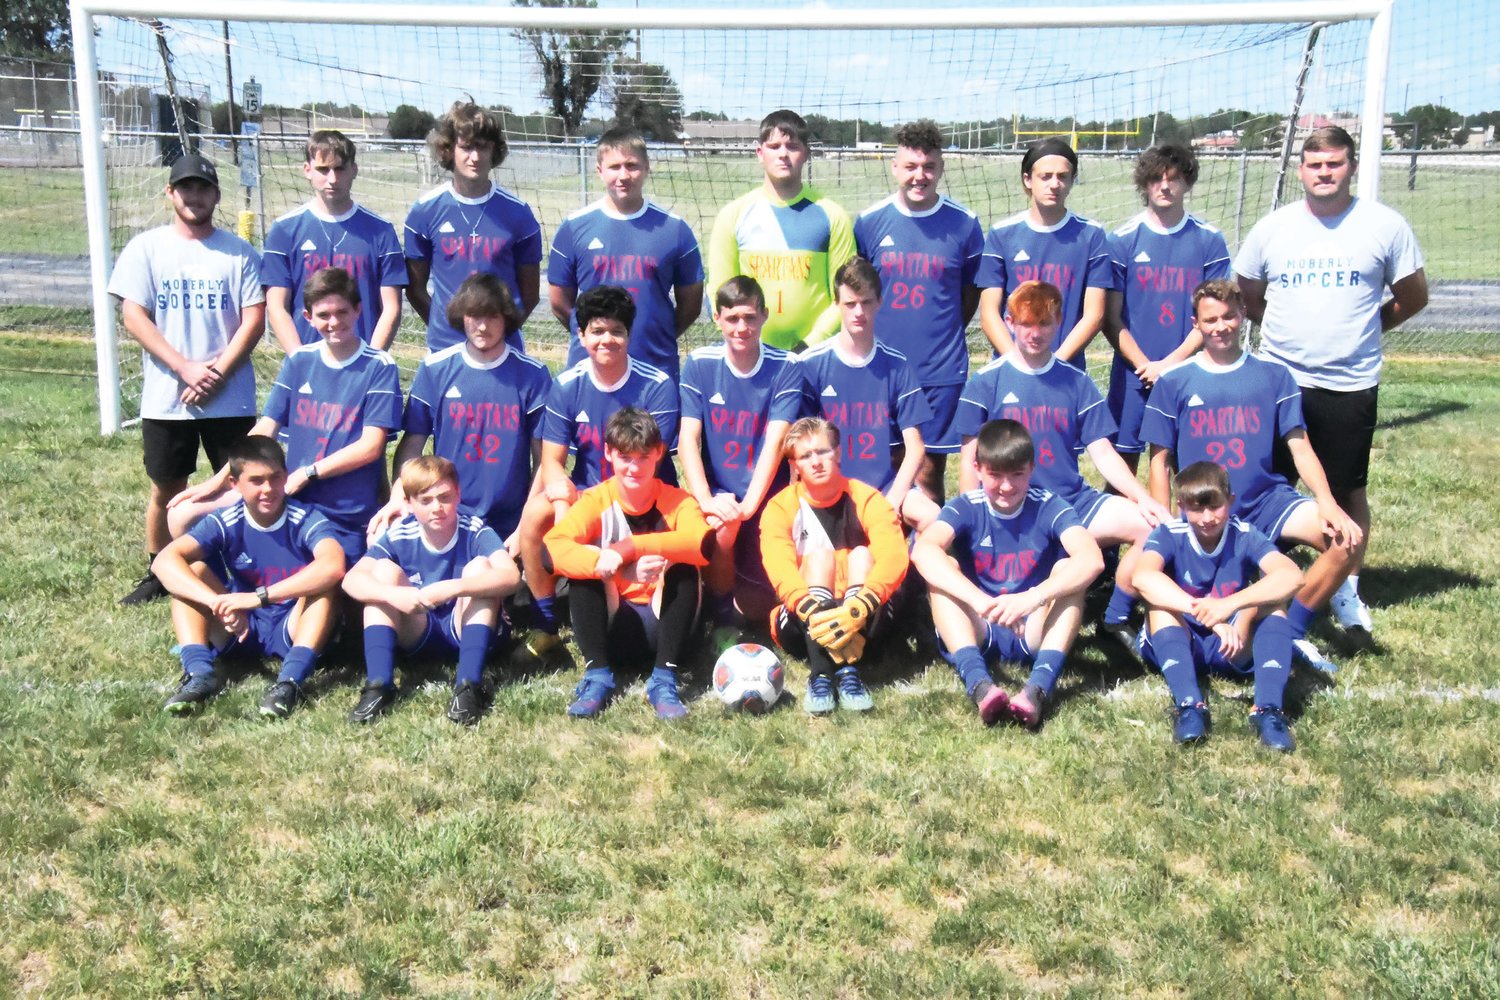 The Moberly High School boys’ soccer team features an all-new coaching staff with Bridger Pretz and Kristofer Samuels. The Spartans return five letterwinners off a team that finished 9-11-1, eliminated in the opening round of districts.